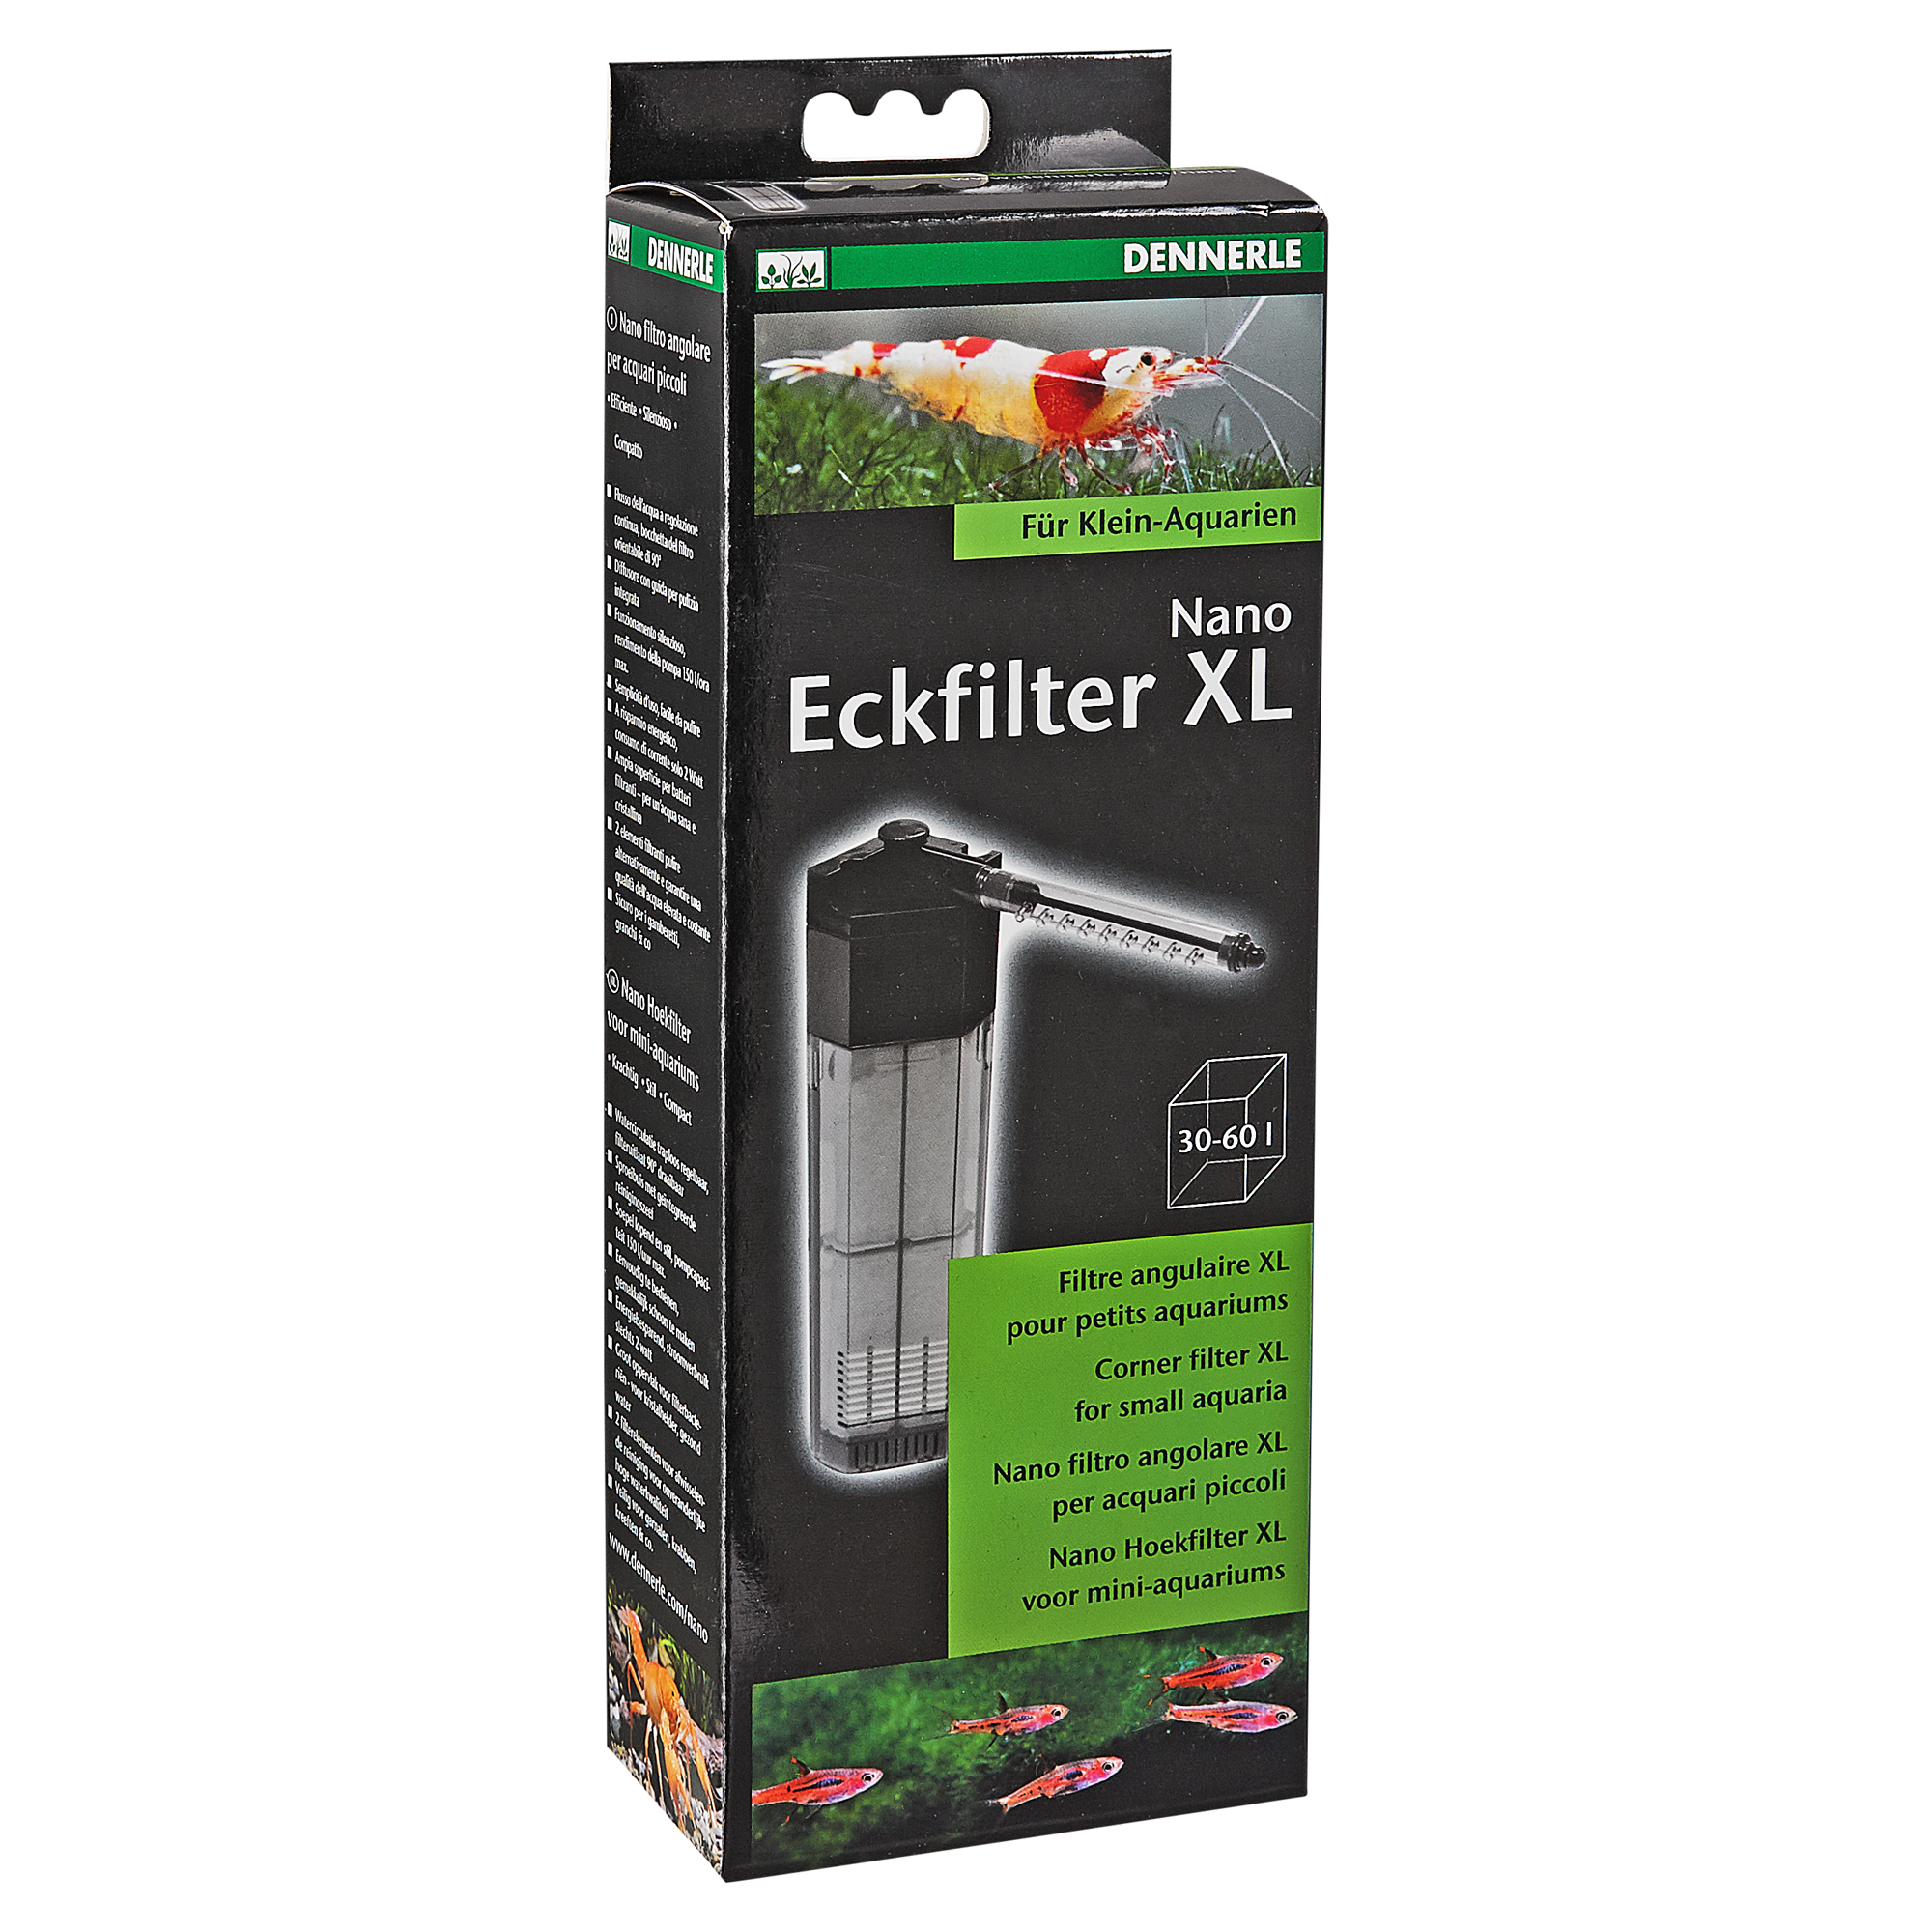 Eckfilter "Nano" XL 25 x 7 x 4 cm + product picture